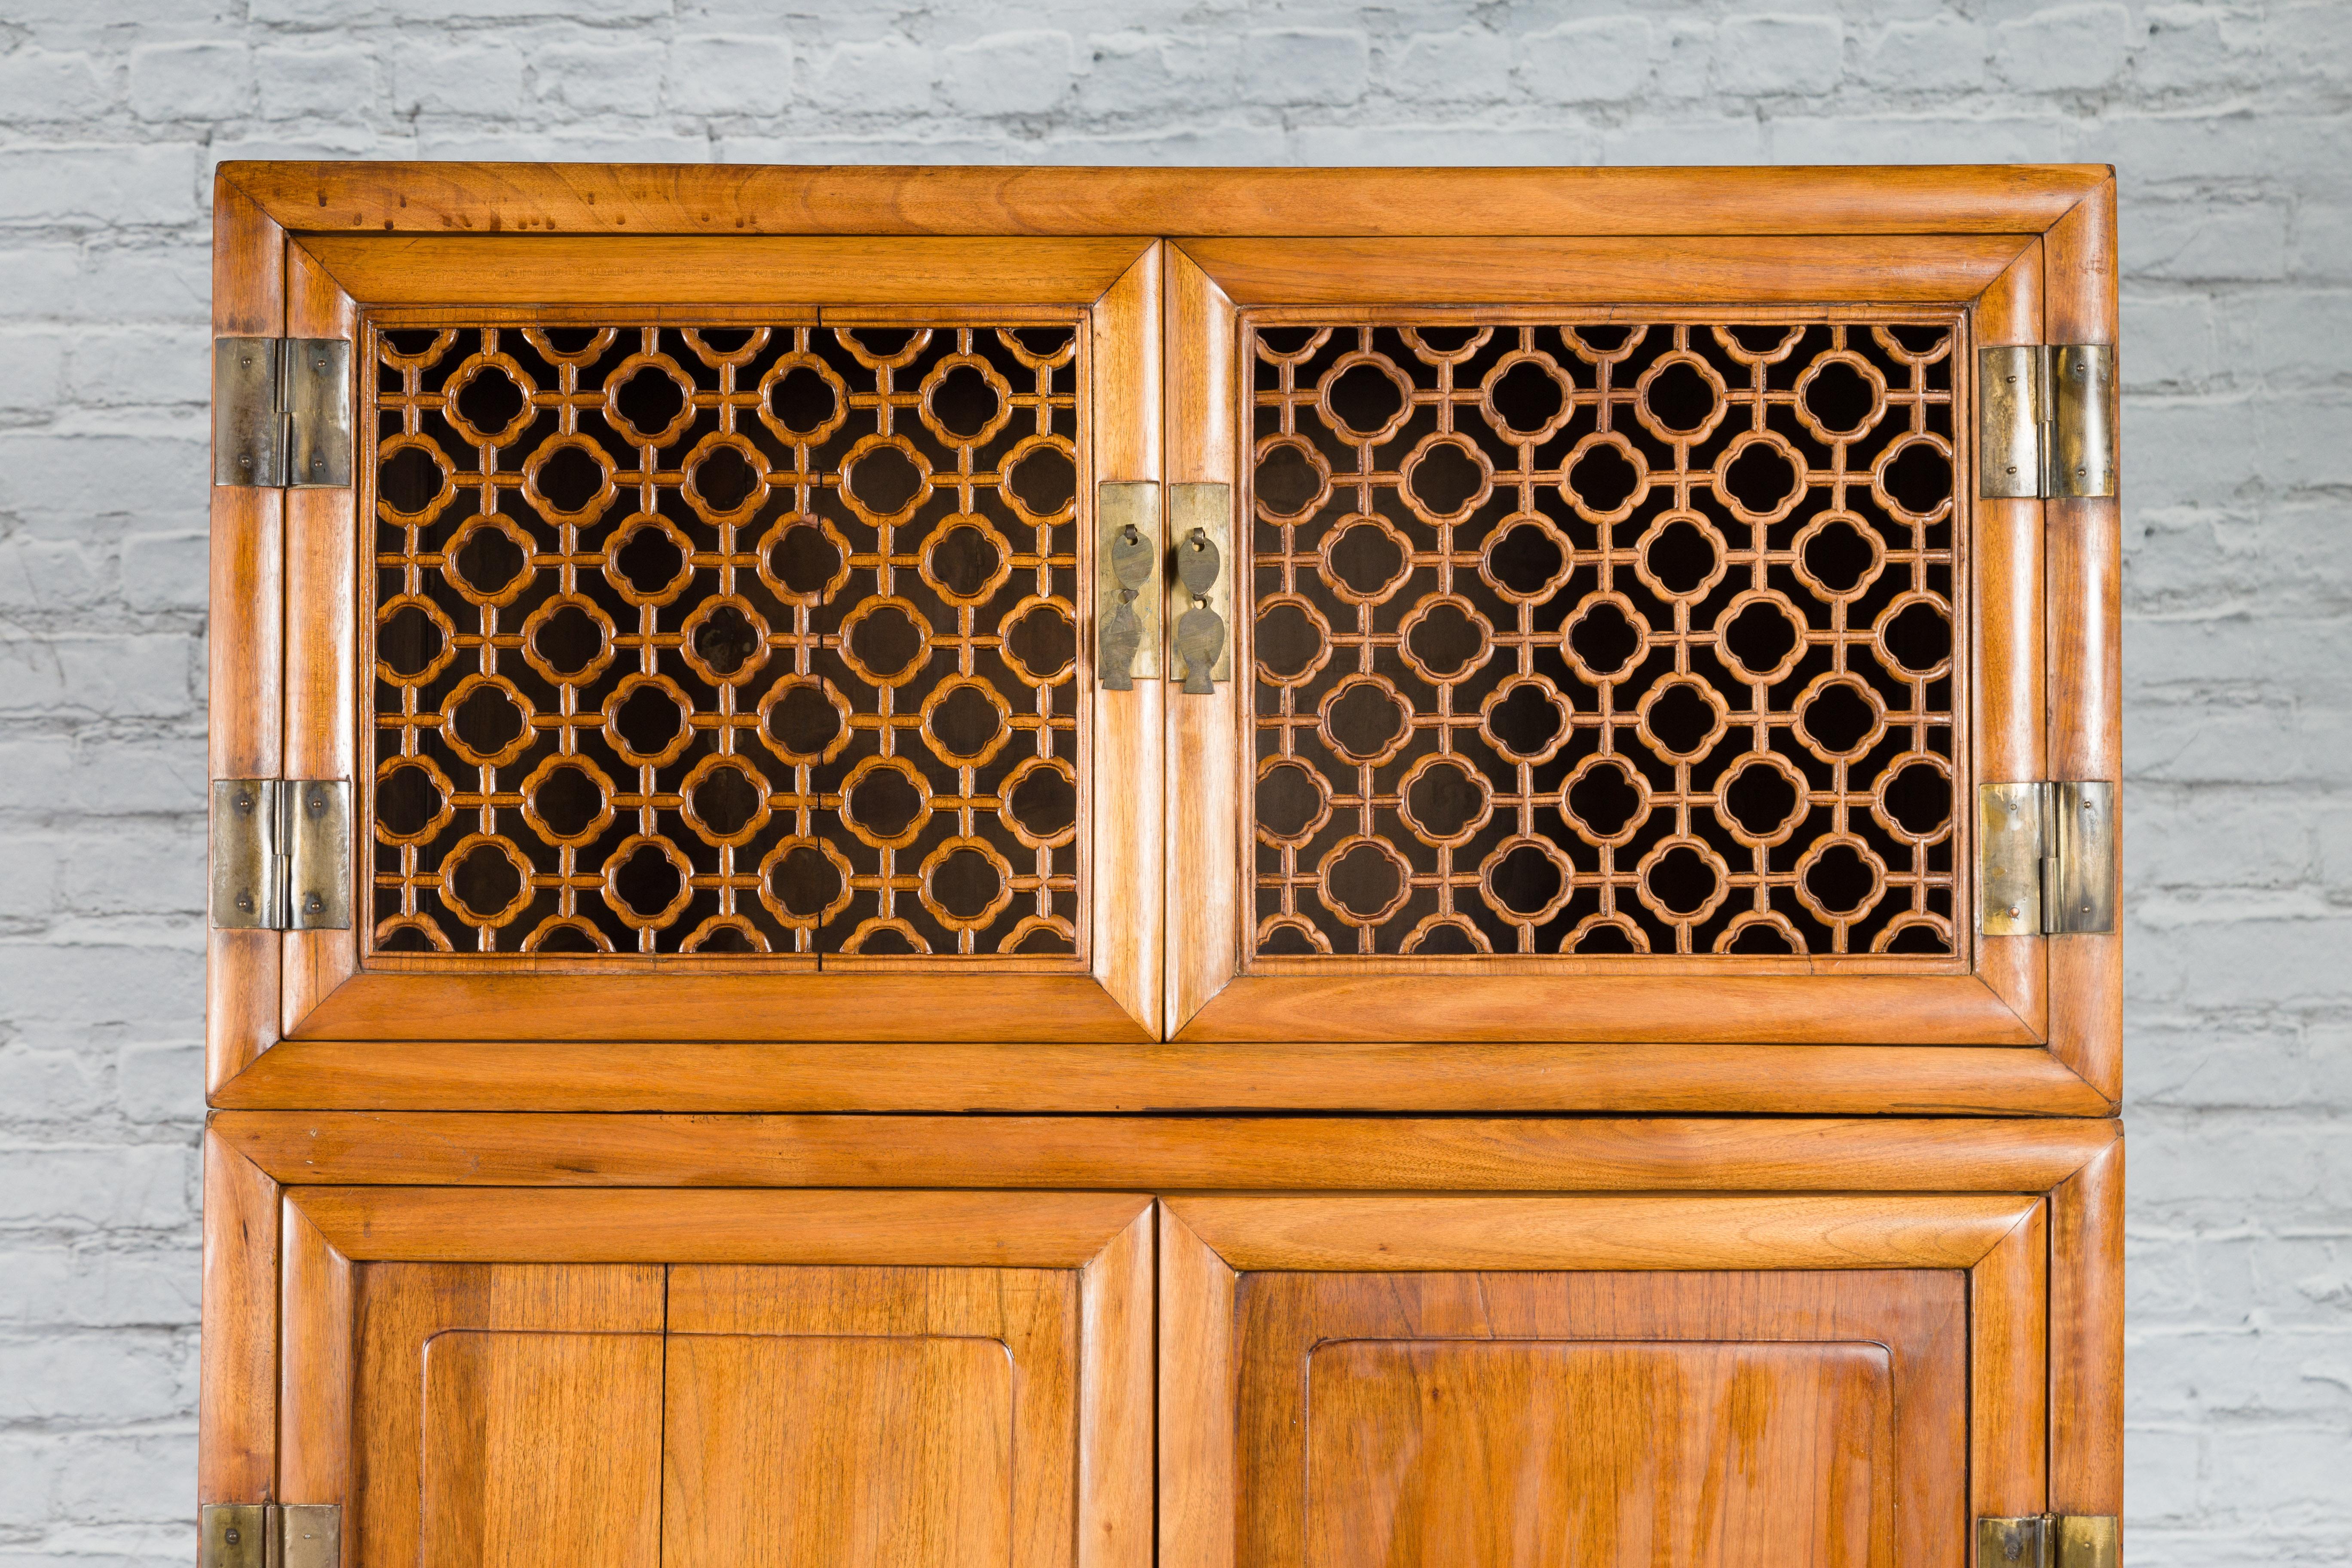 Chinese Qing Dynasty 19th Century Kitchen Cabinet with Quatrefoil Style Fretwork For Sale 1